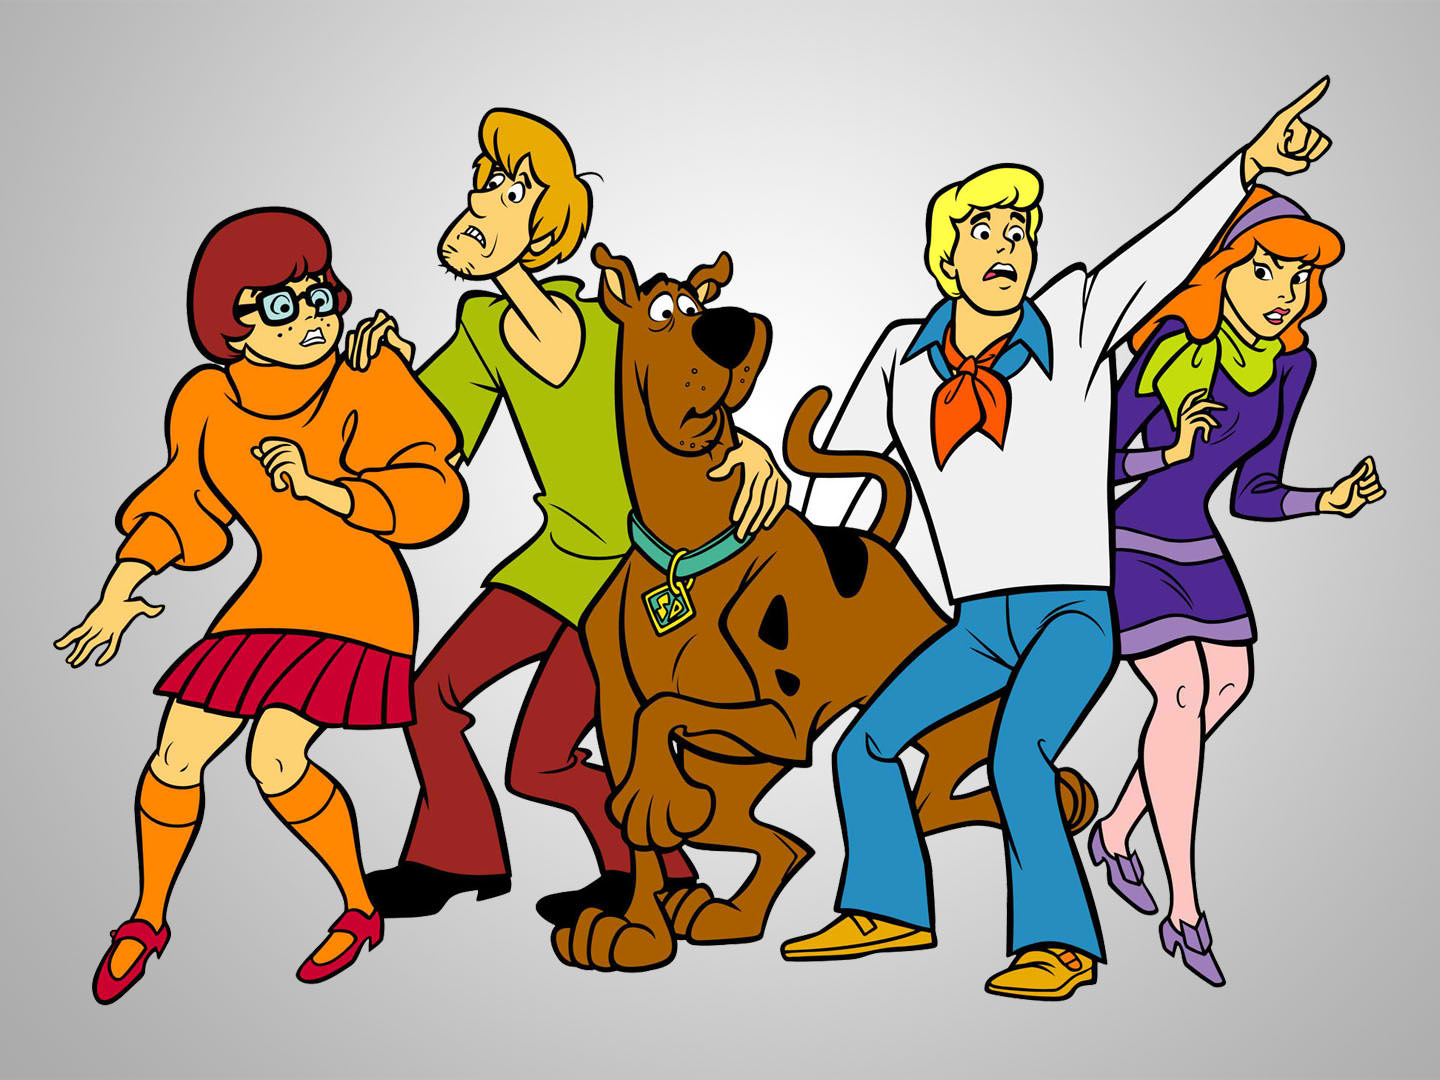 ScoobyDoo and the Gang Return to the Big Screen in New Animated Feature